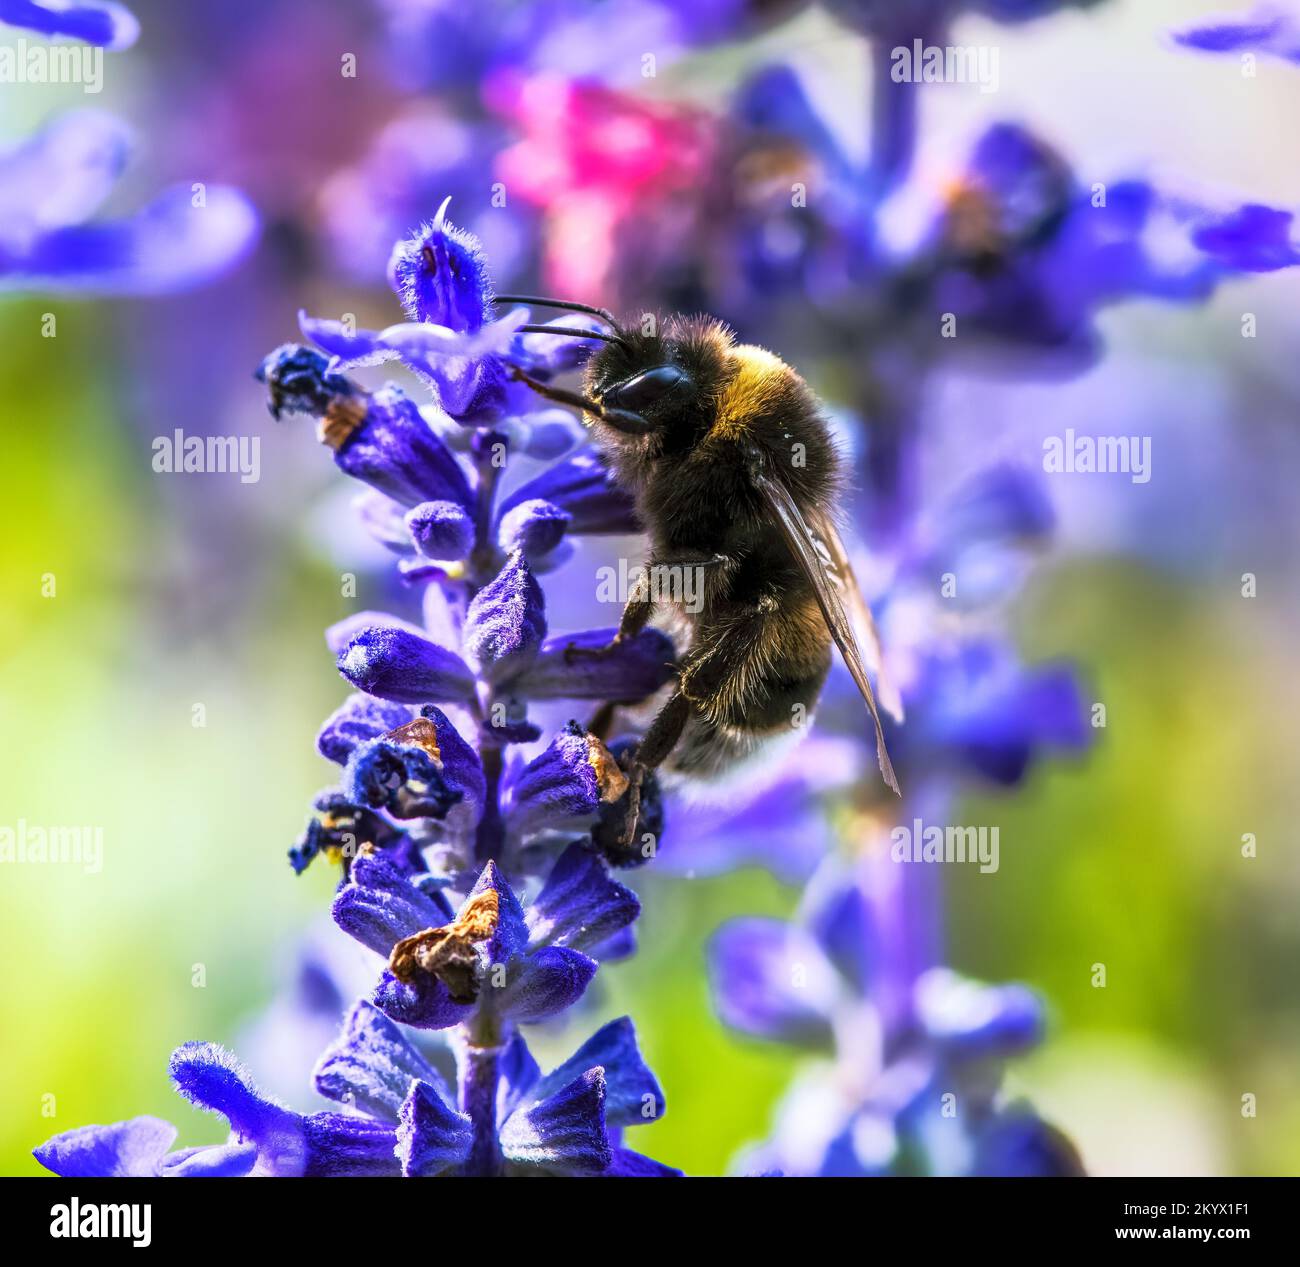 Macro of a northern white-tailed bumblebee on a purple sage flower blossom Stock Photo